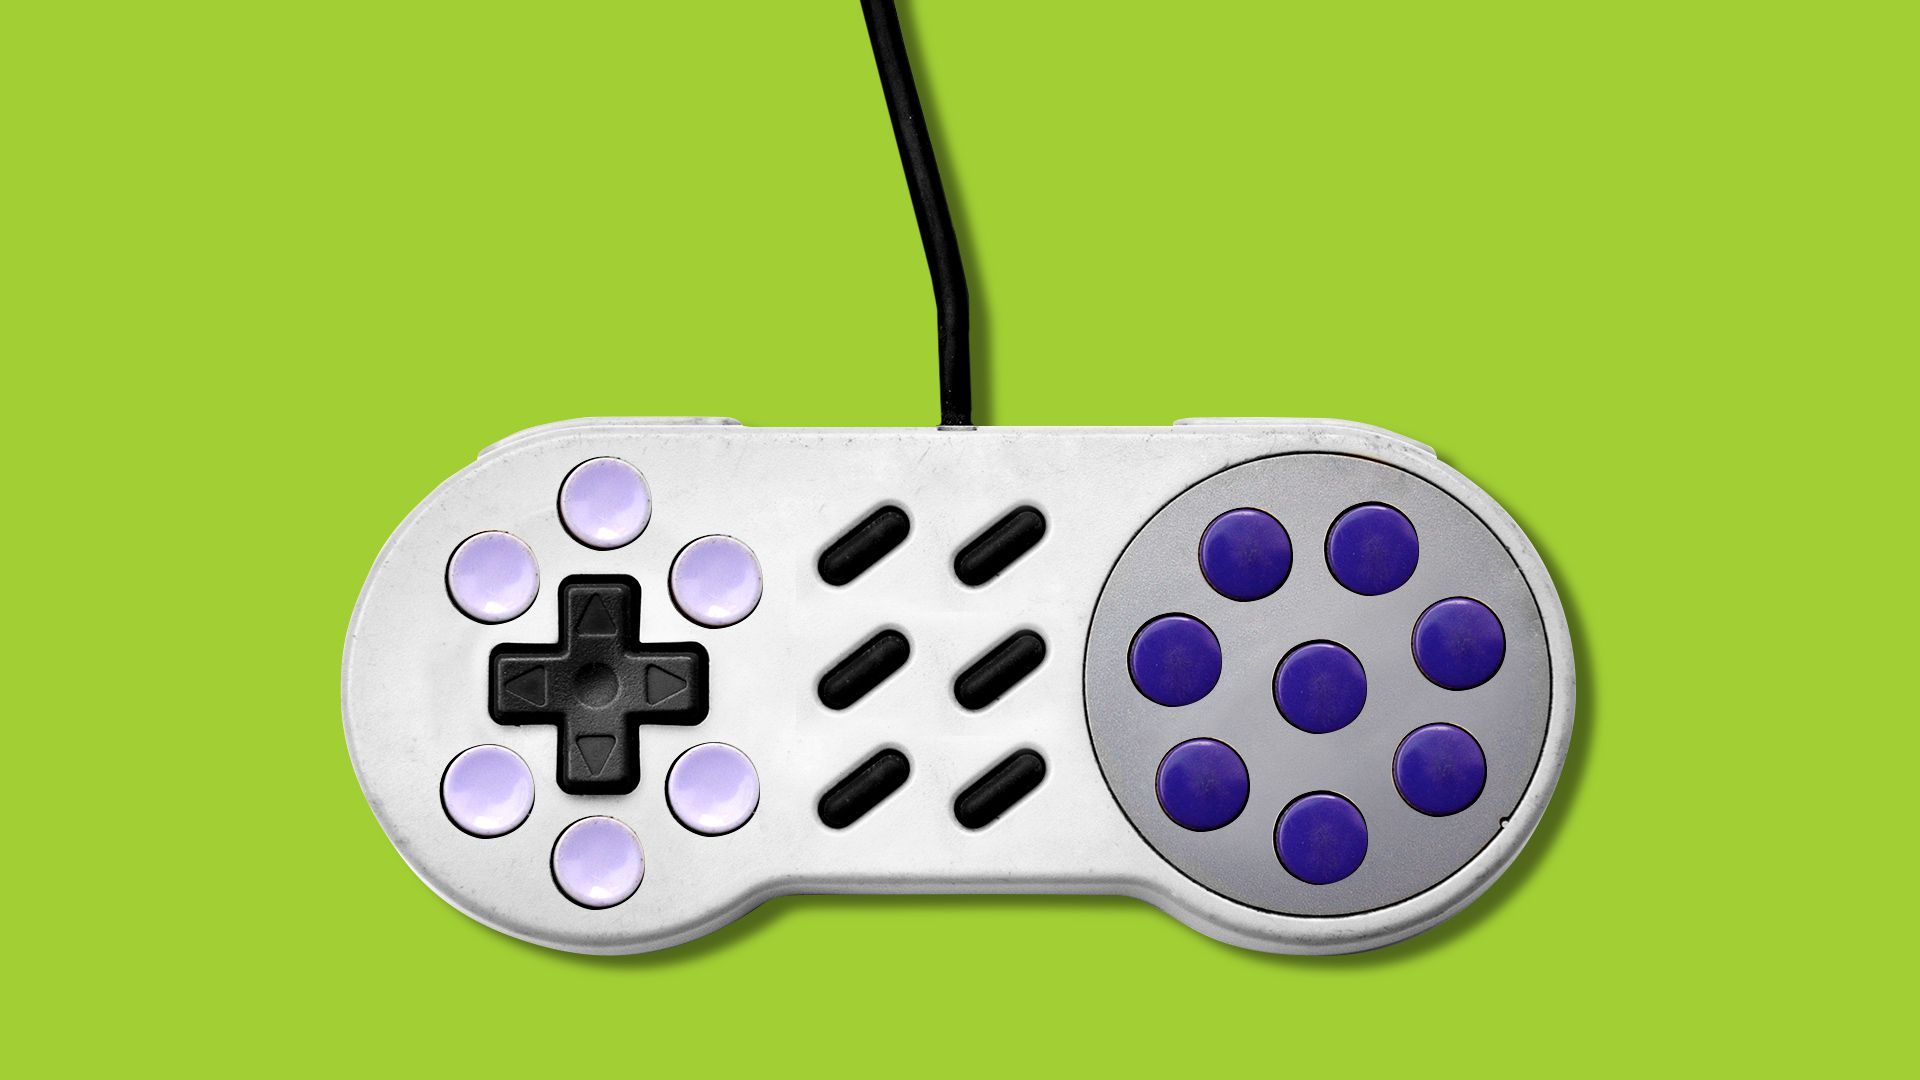 Illustration of a video game controller with an absurd number of buttons.   